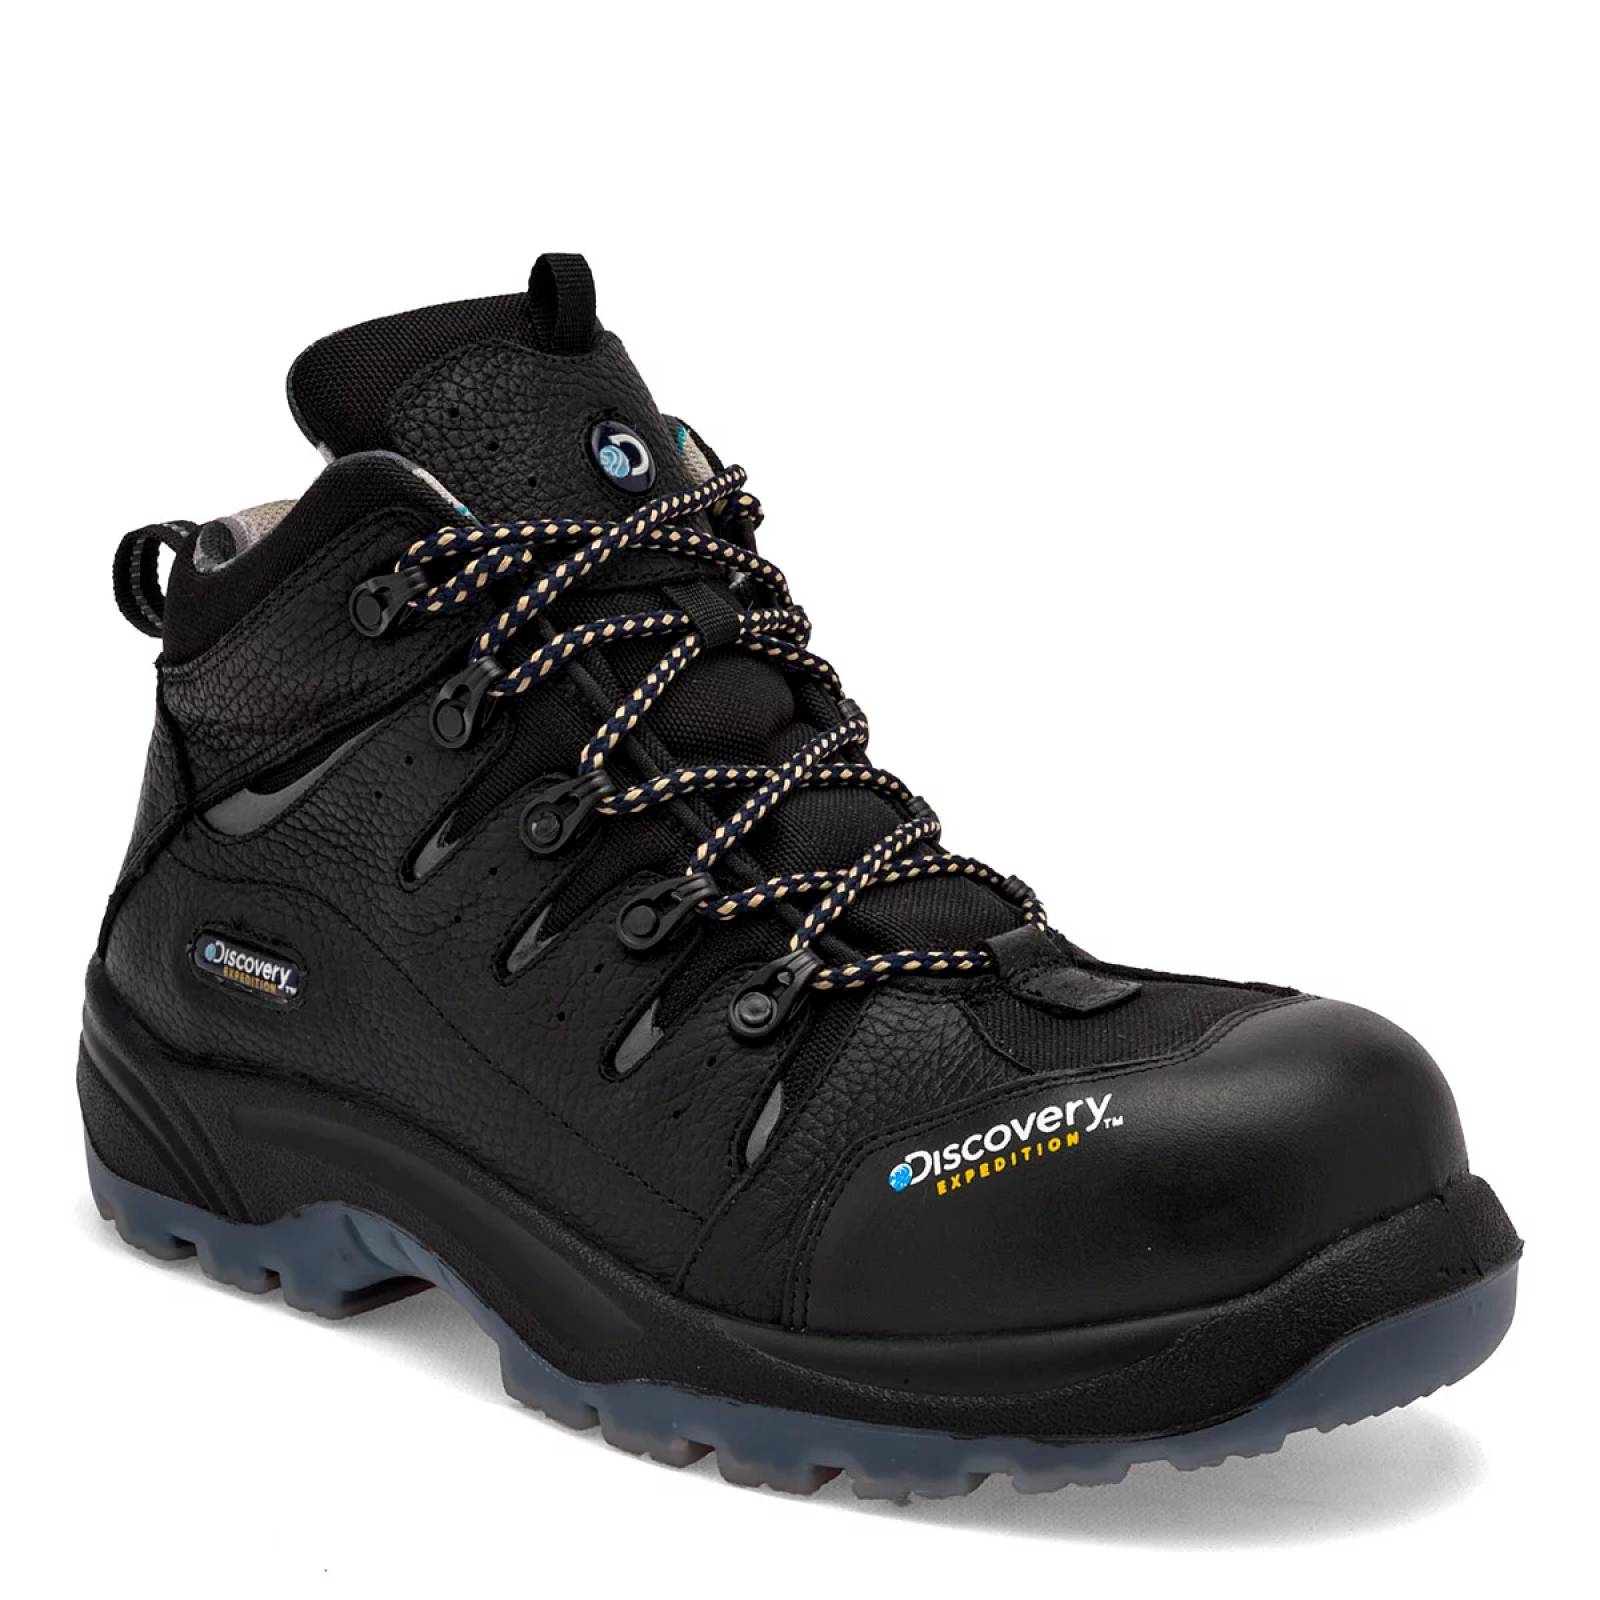 BOTA INDUSTRIAL Discovery expedition 1951 Color Negro PARA Hombre Tx7